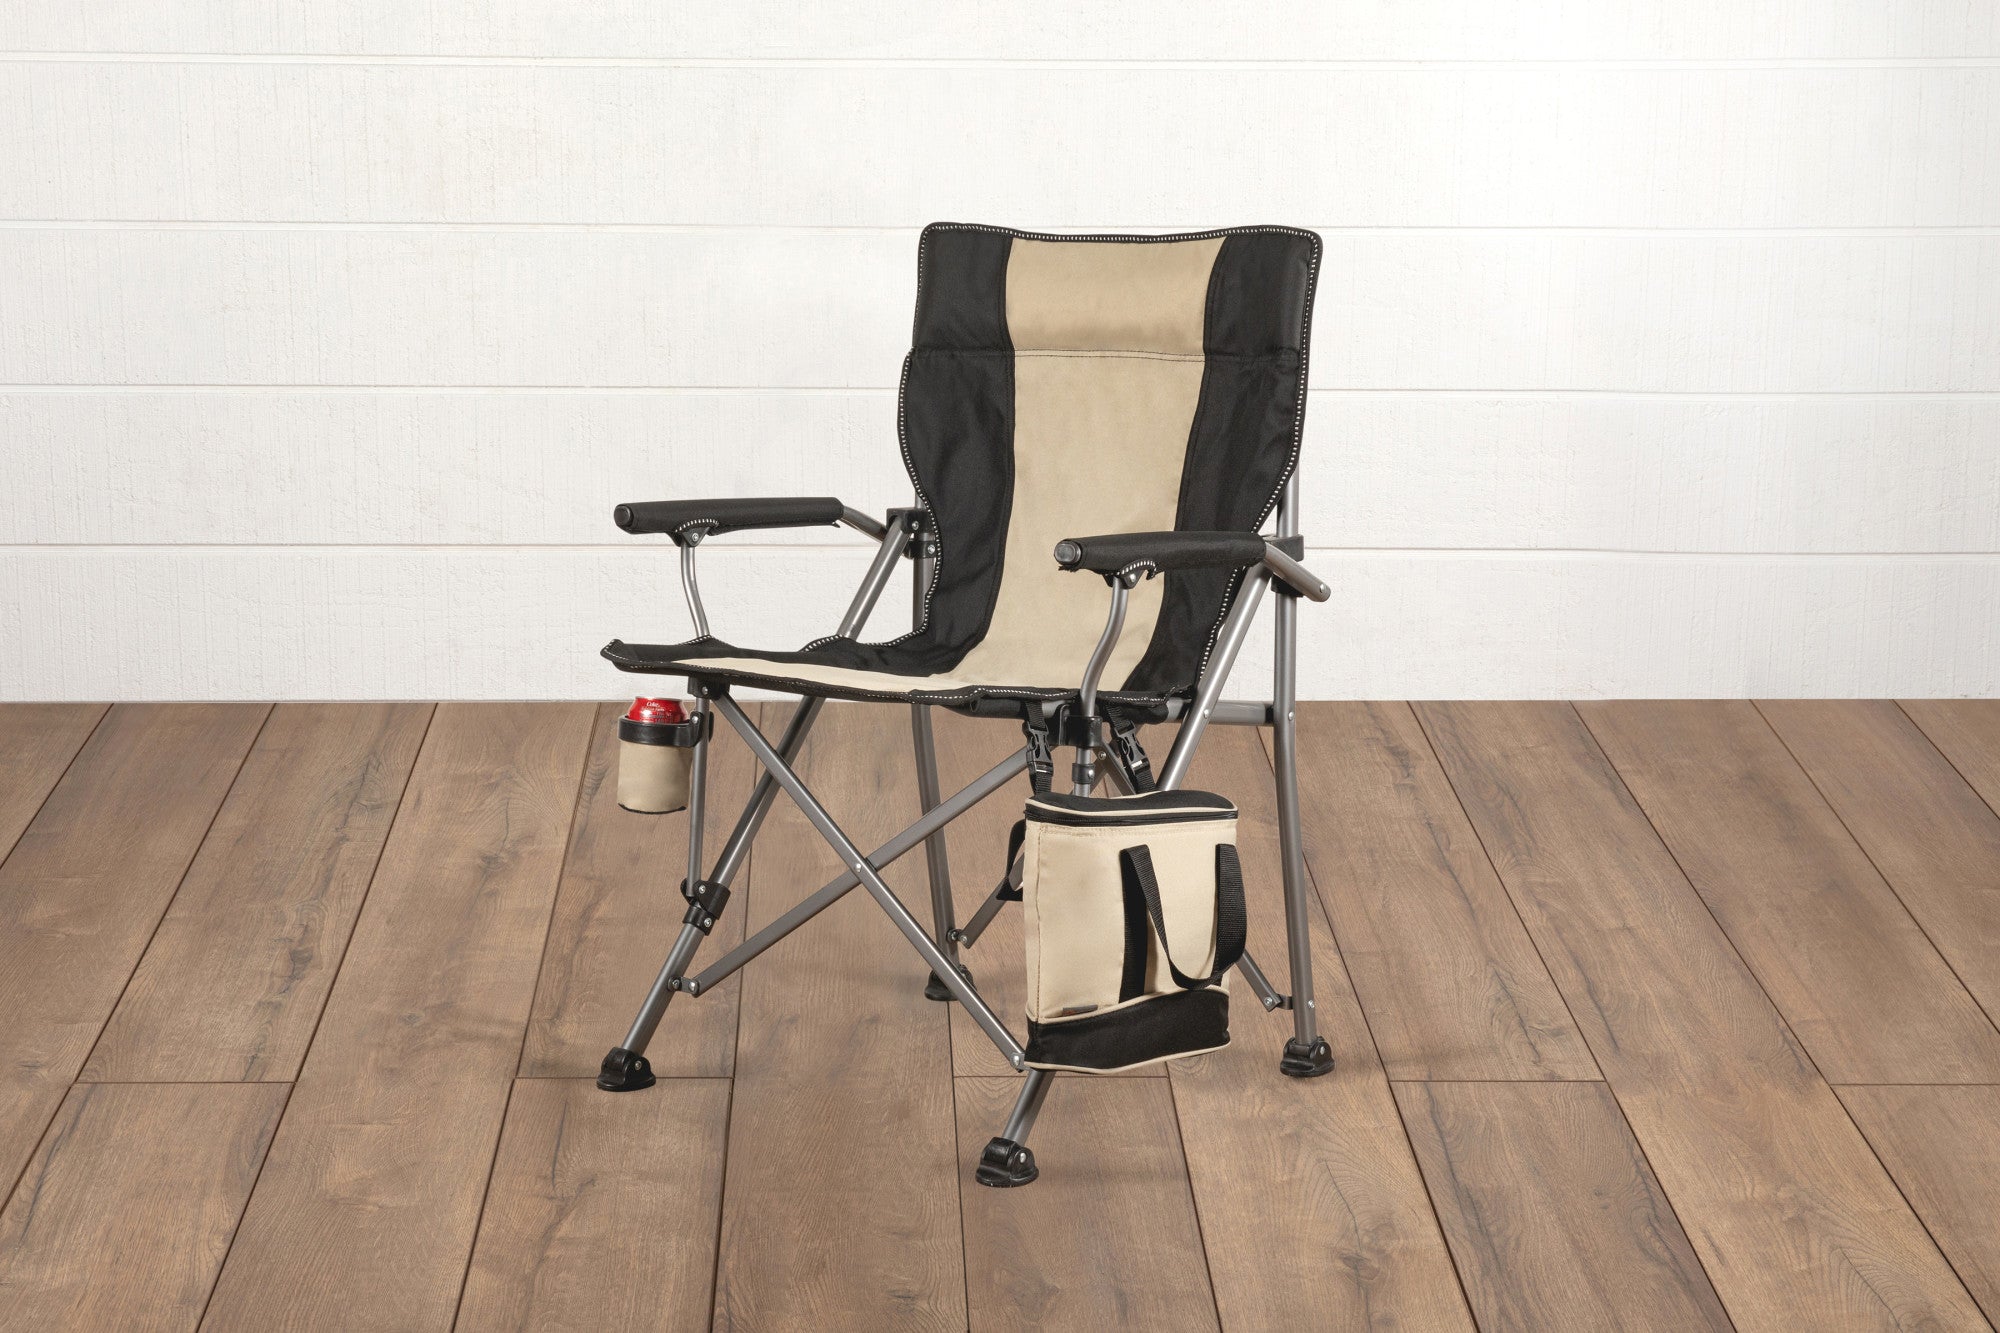 New Orleans Saints - Outlander XL Camping Chair with Cooler